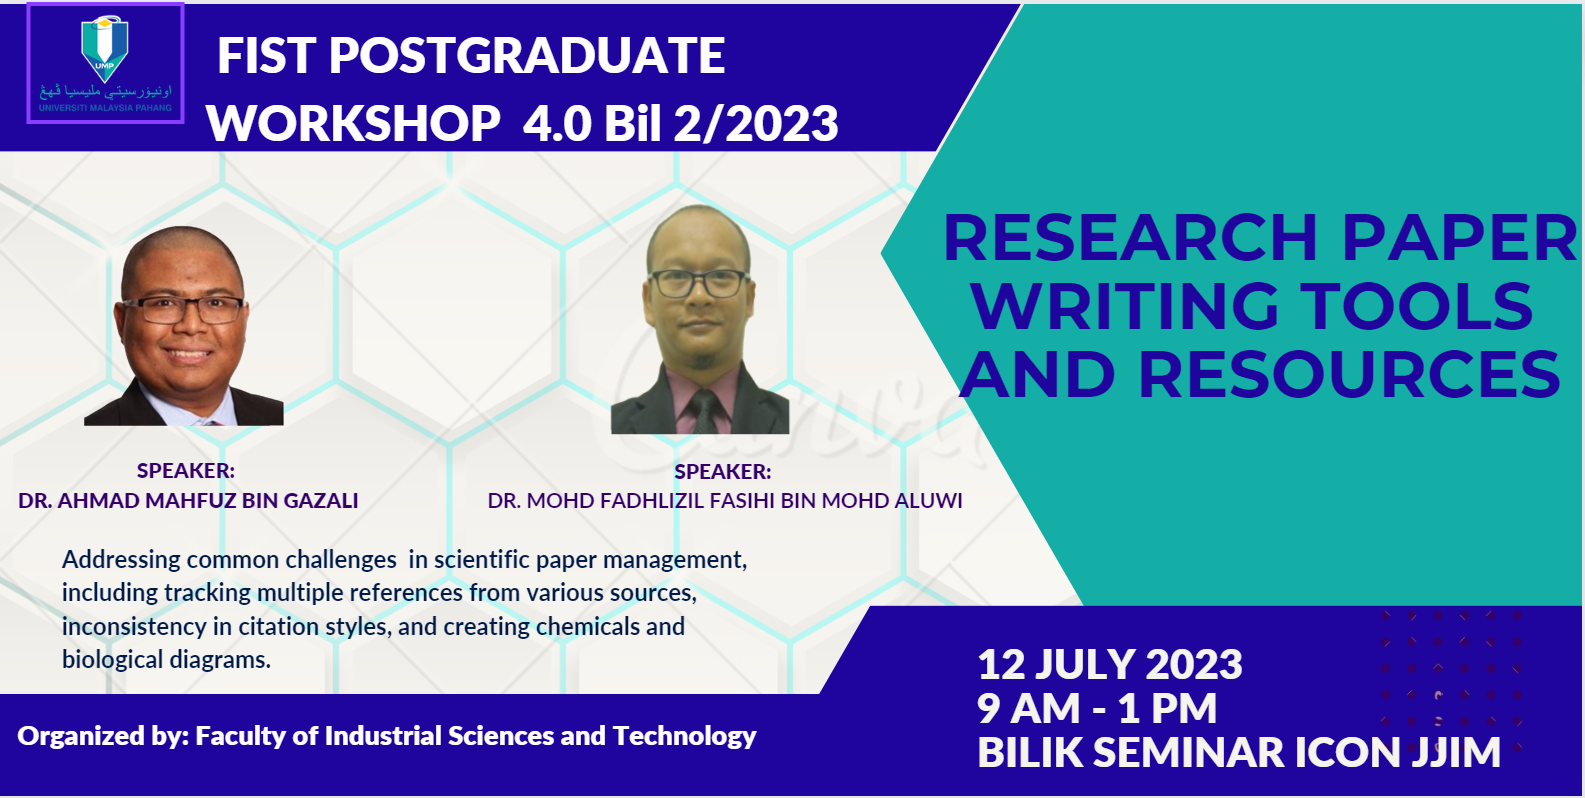 FIST Postgraduate Workshop 4.0 No 2/2023: Research Paper Writing Tools and Resources